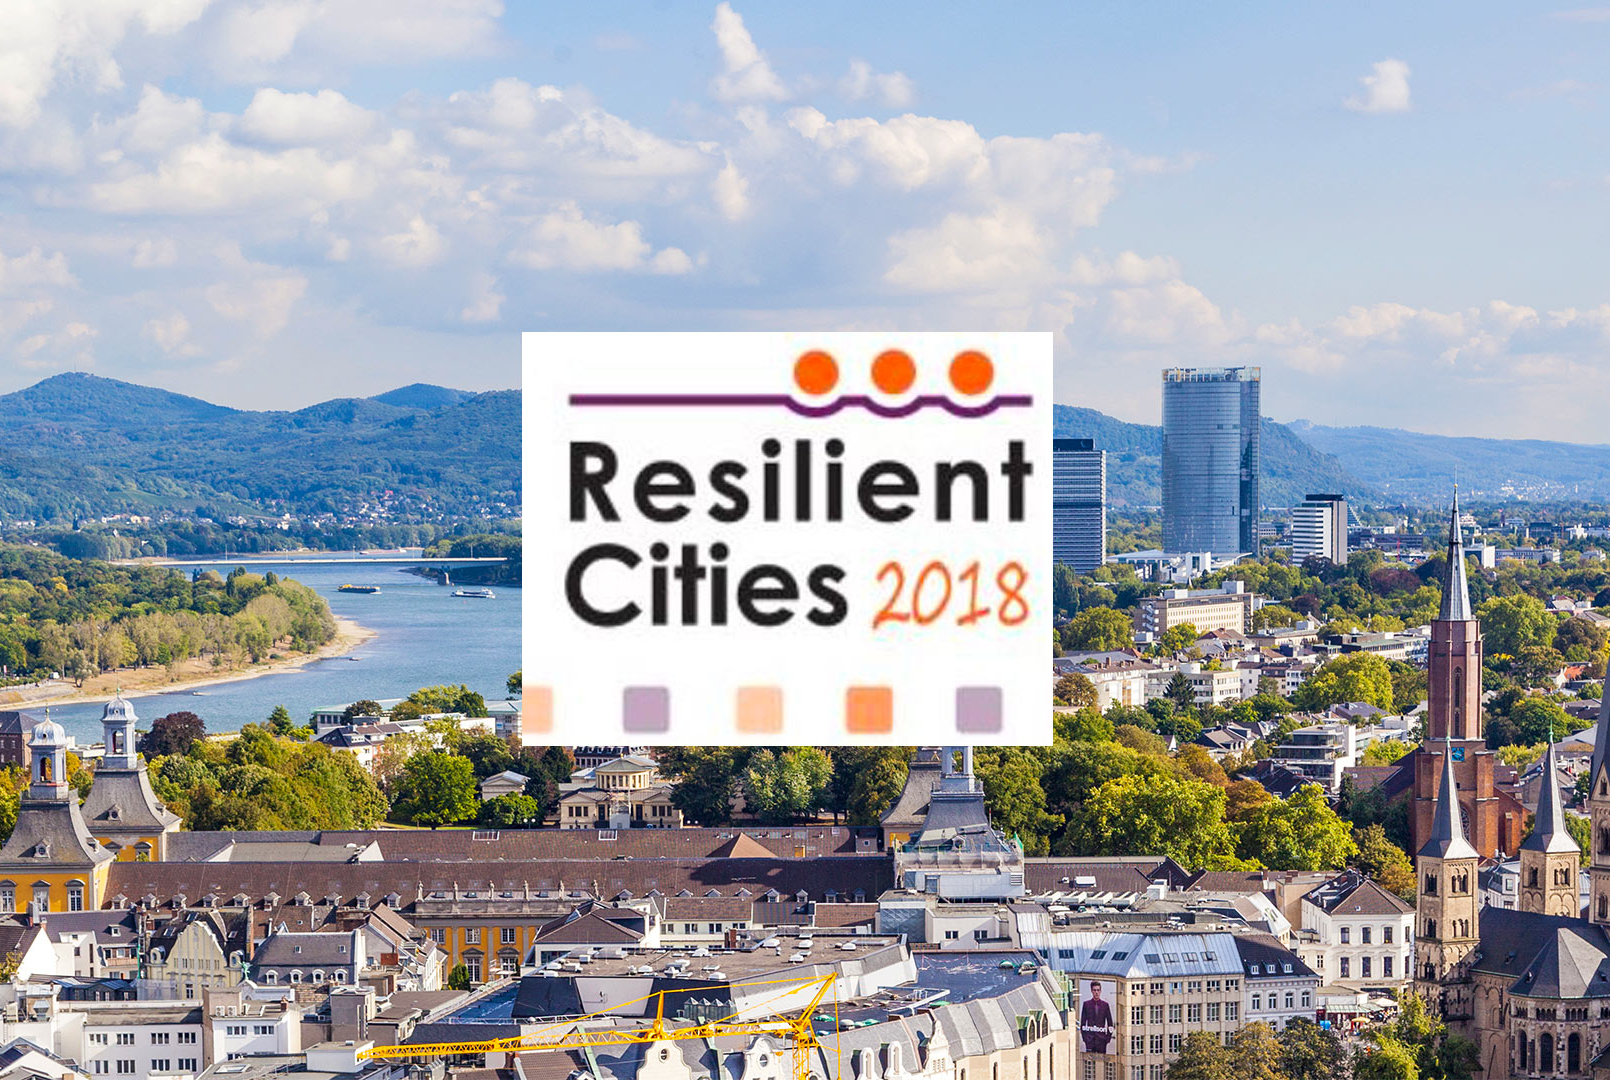 Resilient Cities 2018, ICLEI Global